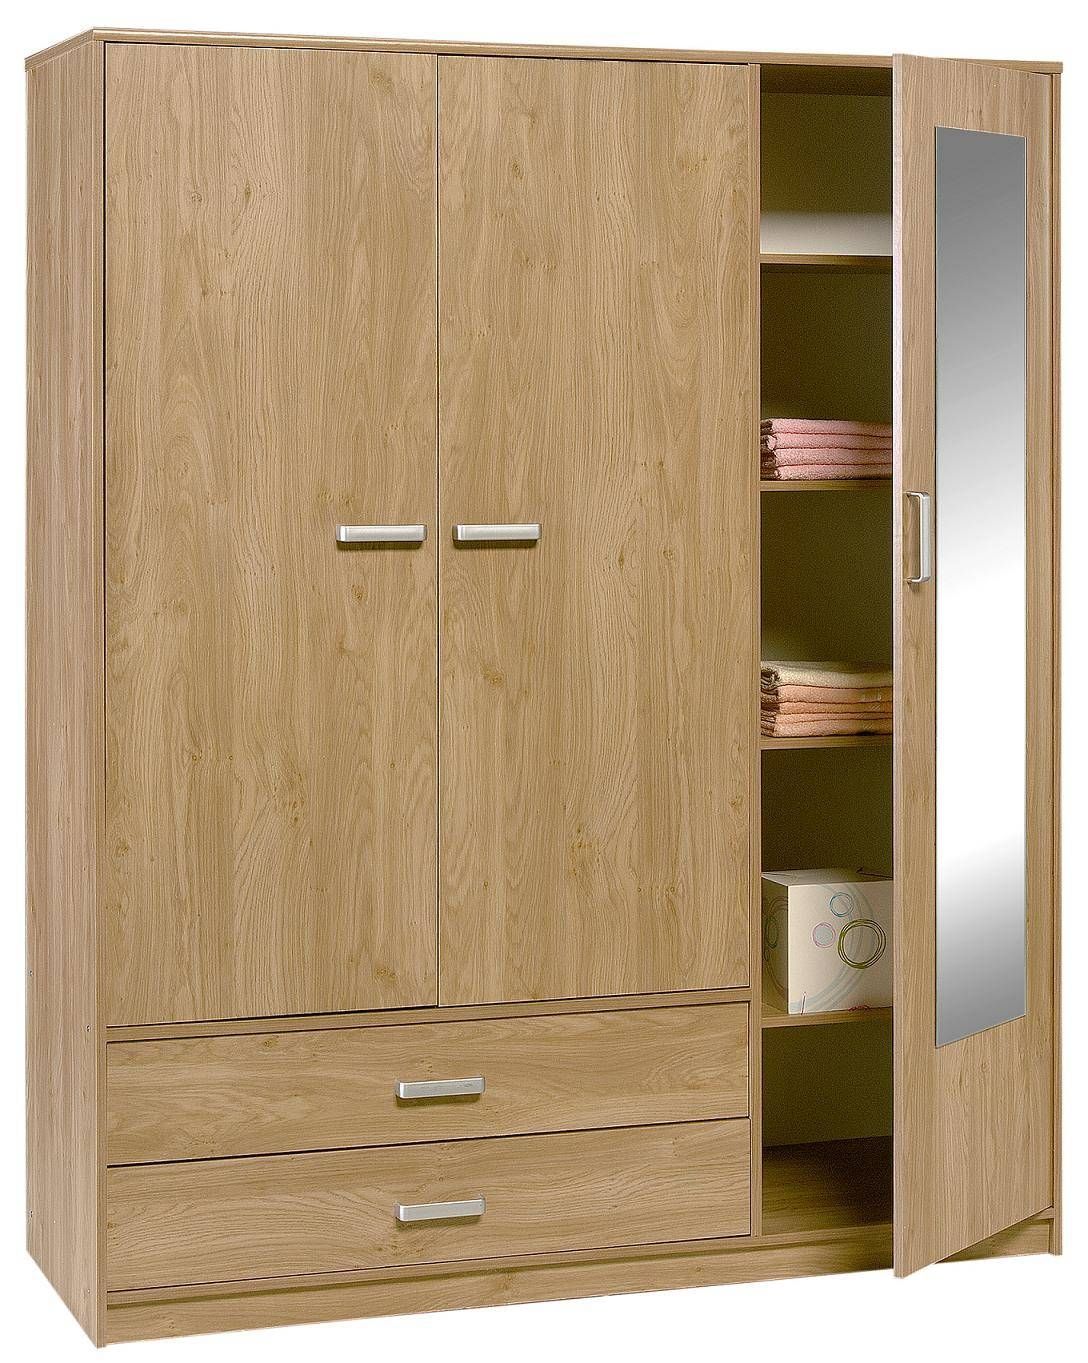 Wardrobes : Andre Victoire: Furniture Delivered And Assembled, Pertaining To Three Door Wardrobes With Mirror (View 4 of 15)